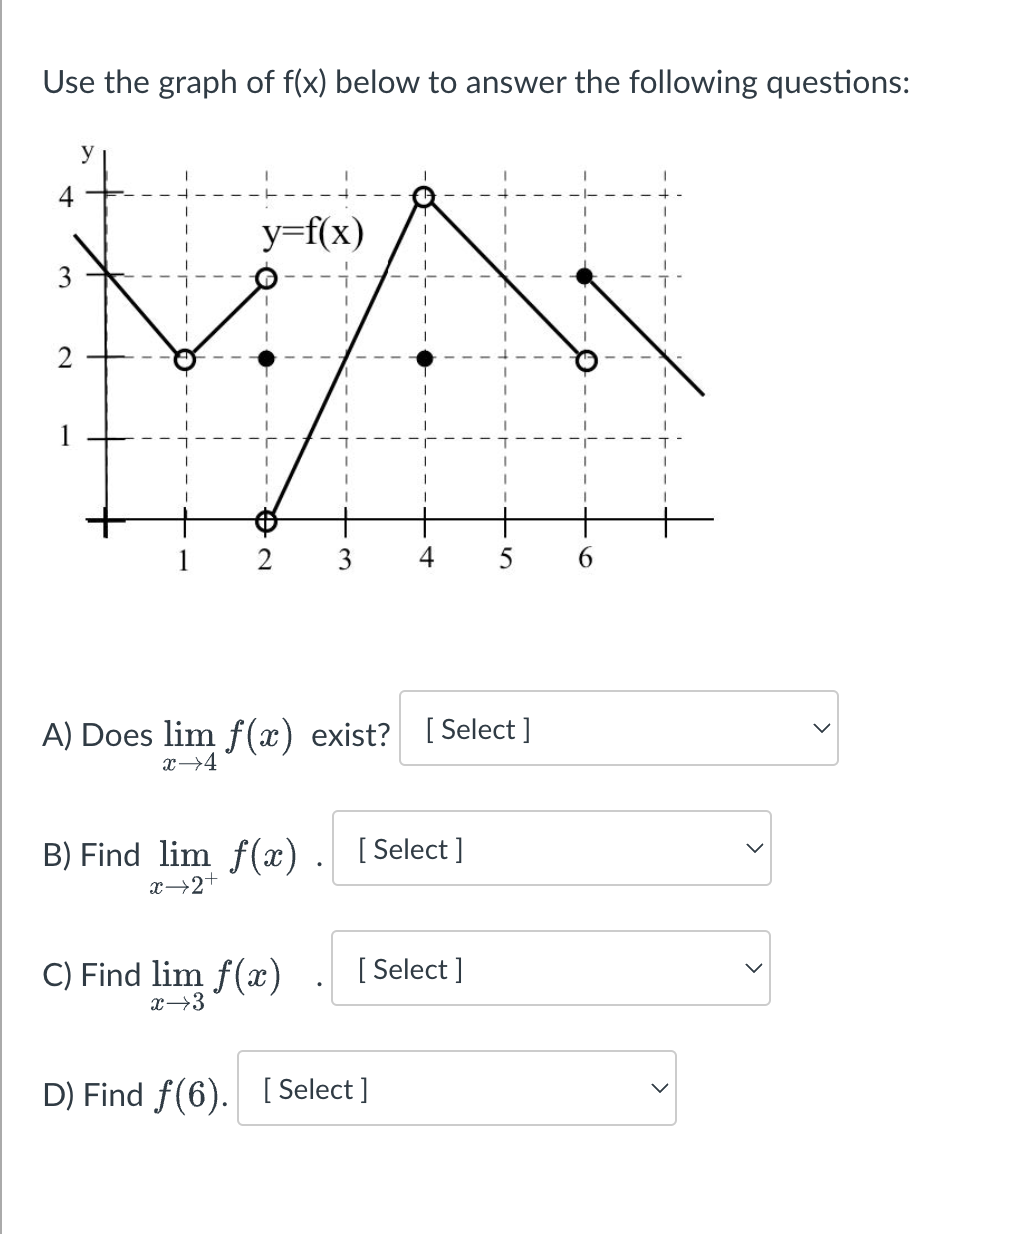 Use the graph of f(x) below to answer the following questions:
y
4
N
y=f(x)
3
C) Find lim f(x)
x→3
A) Does lim f(x) exist? [Select]
x 4
B) Find lim f(x). [Select]
x→2+
4
D) Find f(6). [
[Select]
[Select]
5